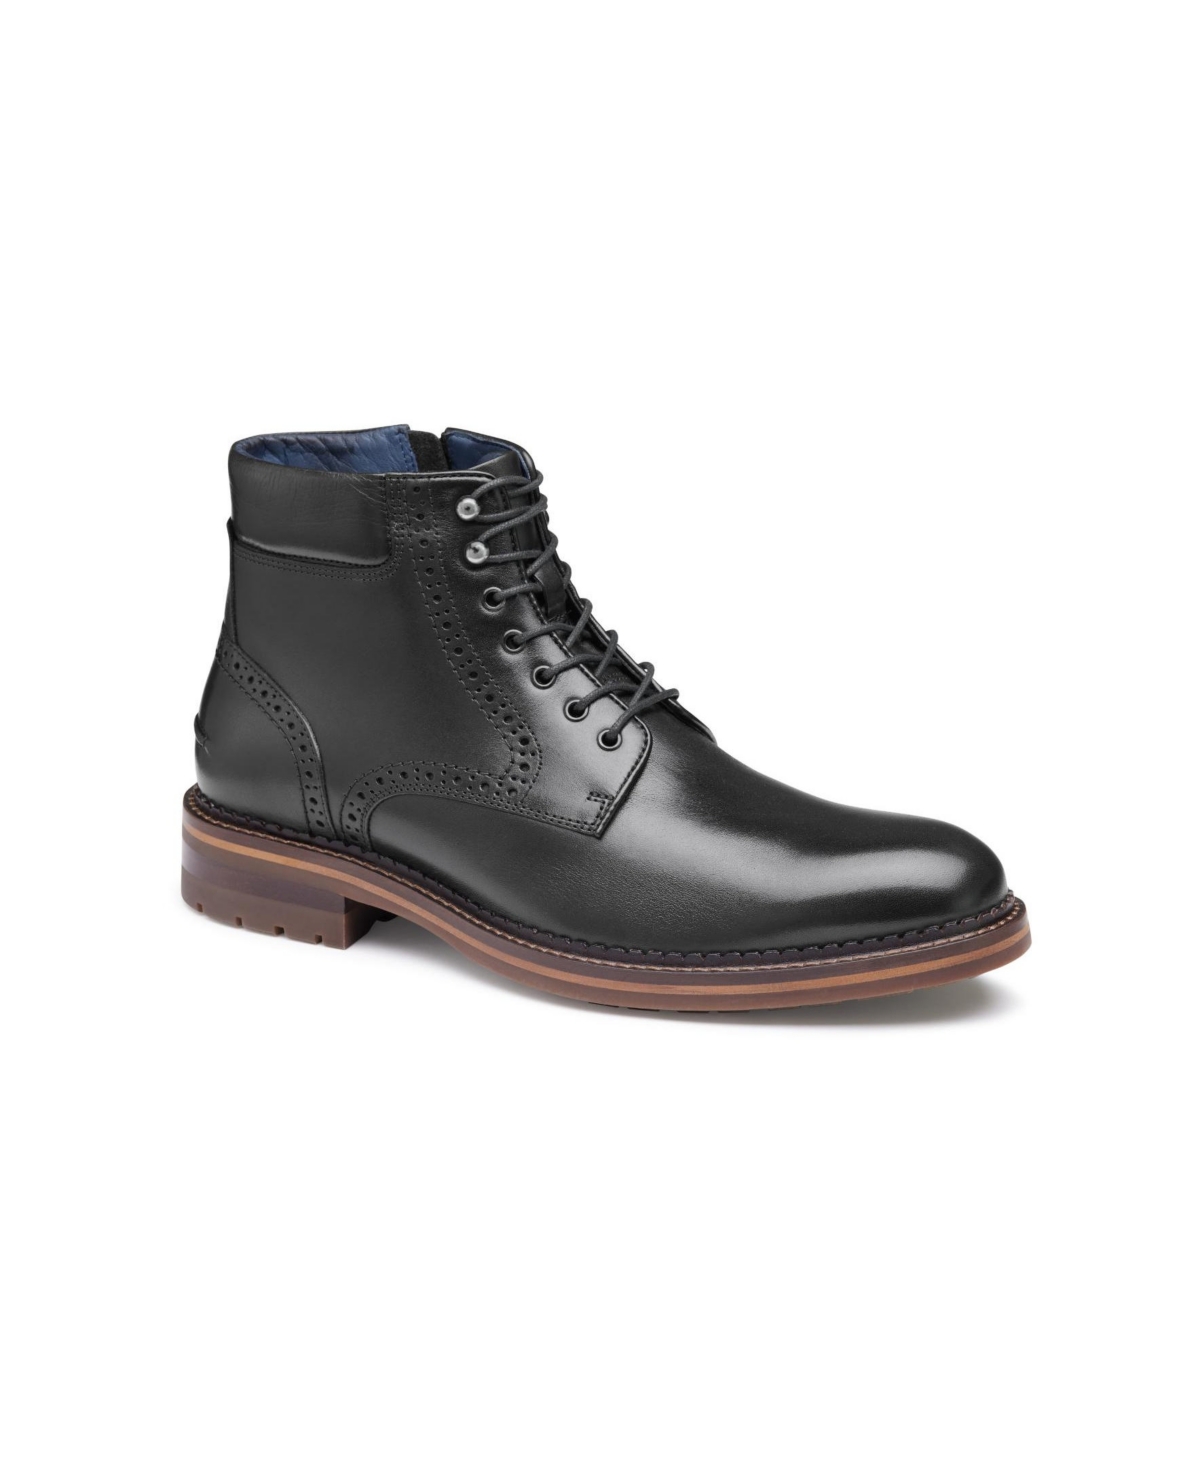 Johnston & Murphy Men's Connelly Leather Plain Toe Boots In Black Full Grain Leather